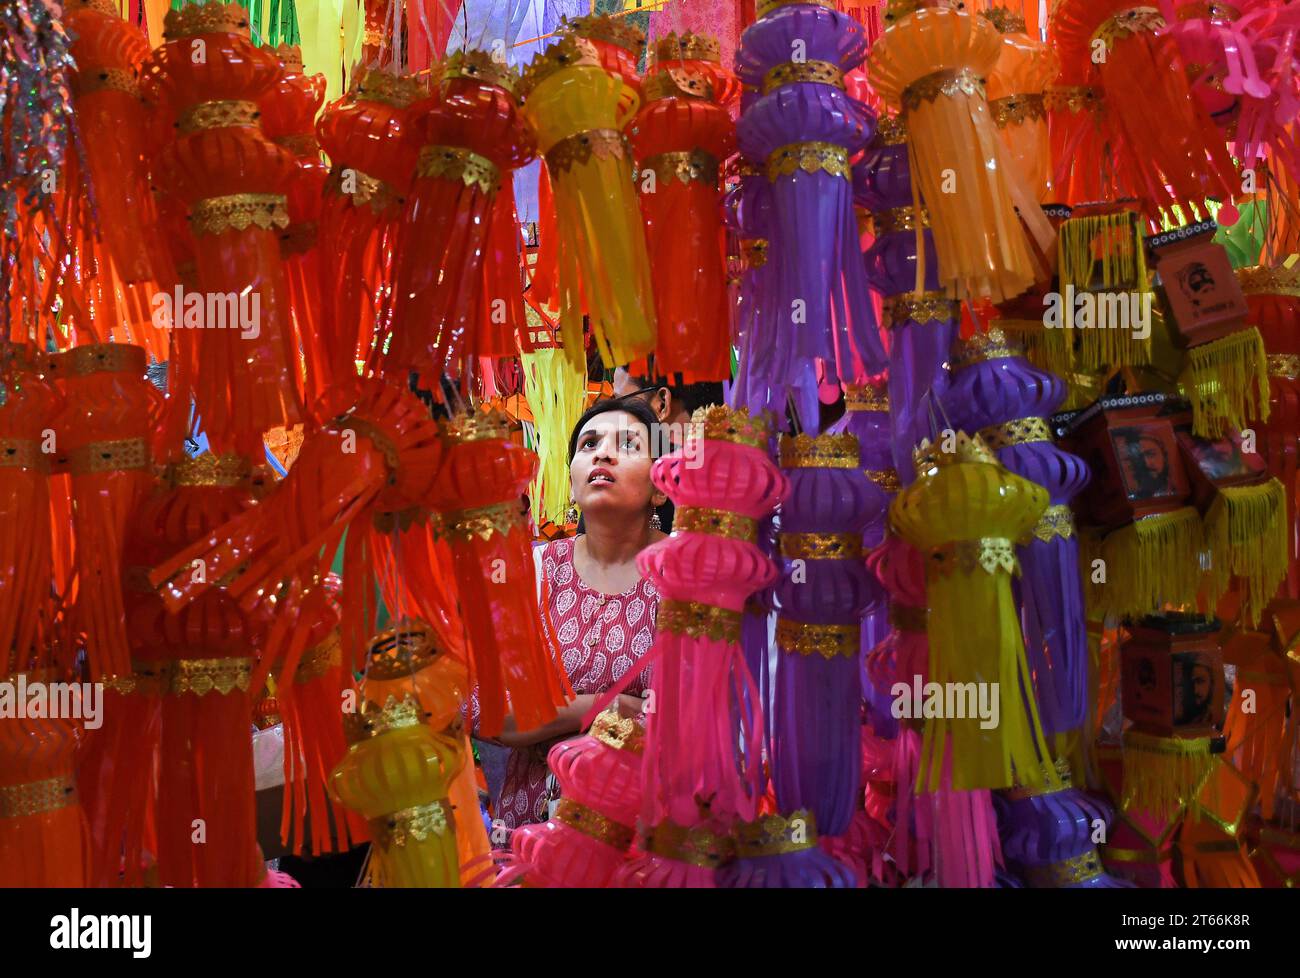 Mumbai, India. 08th Nov, 2023. A woman shops for lanterns ahead of the Hindu festival of lights, Diwali in Mumbai. Diwali festival is celebrated by Hindus where they shop for lanterns ahead of the festival, clean their home, prepare sweets and snacks, make rangoli (traditional Indian art form where various designs are made on the floor) and light their homes with earthen lamps marking victory of light over darkness. Credit: SOPA Images Limited/Alamy Live News Stock Photo